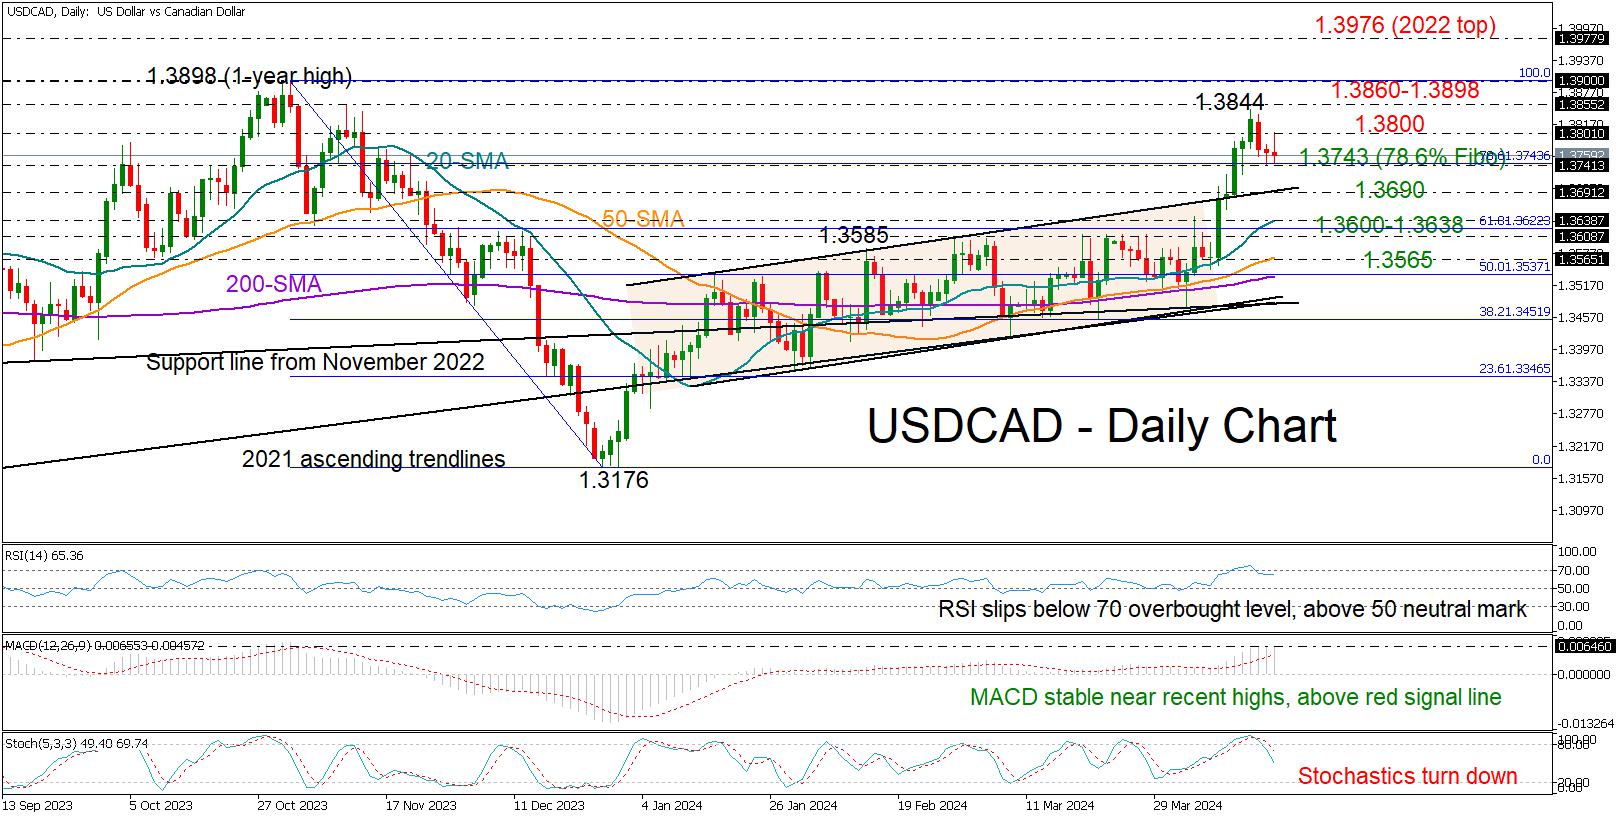 USD/CAD puts rally on hold near 1.3800 caution zone